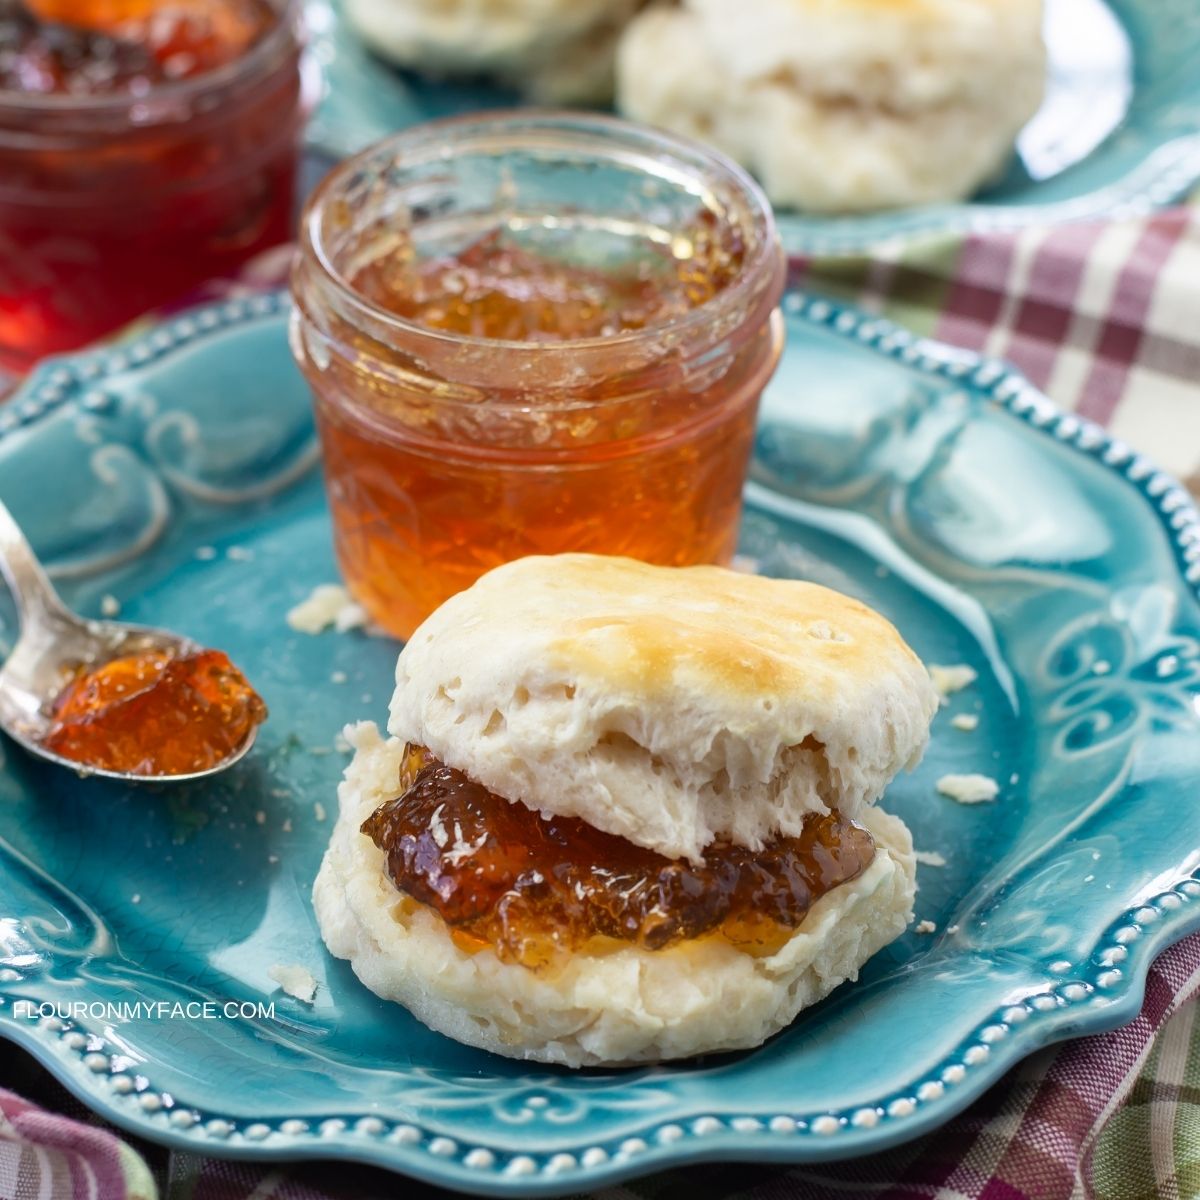 A jar of scuppernog jelly with a biscuit on a plate.